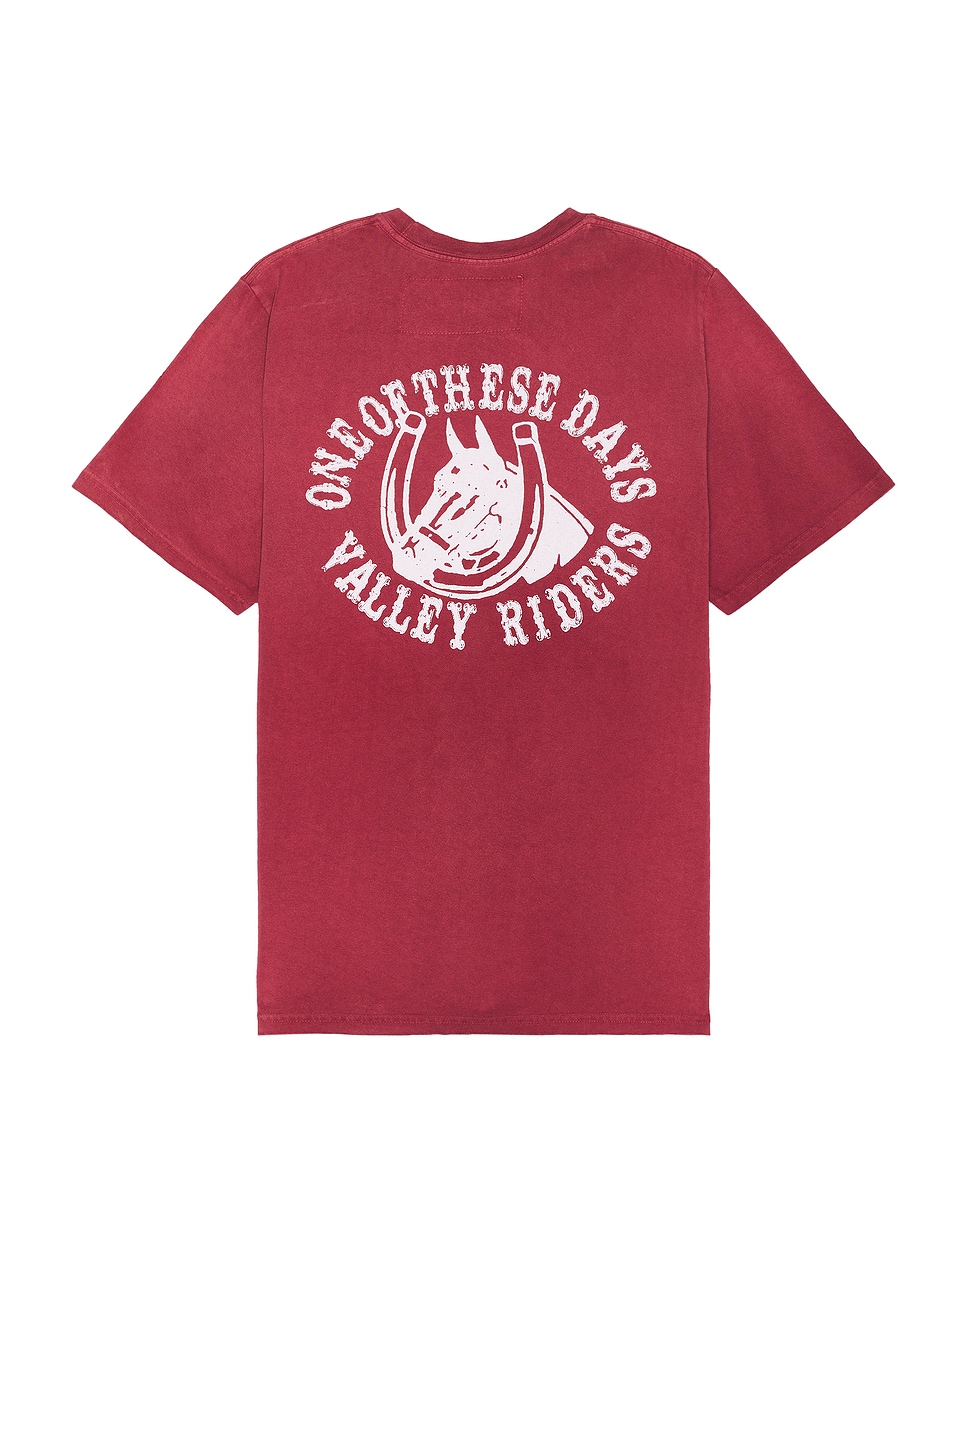 Image 1 of ONE OF THESE DAYS Valley Riders Tee in Burgundy